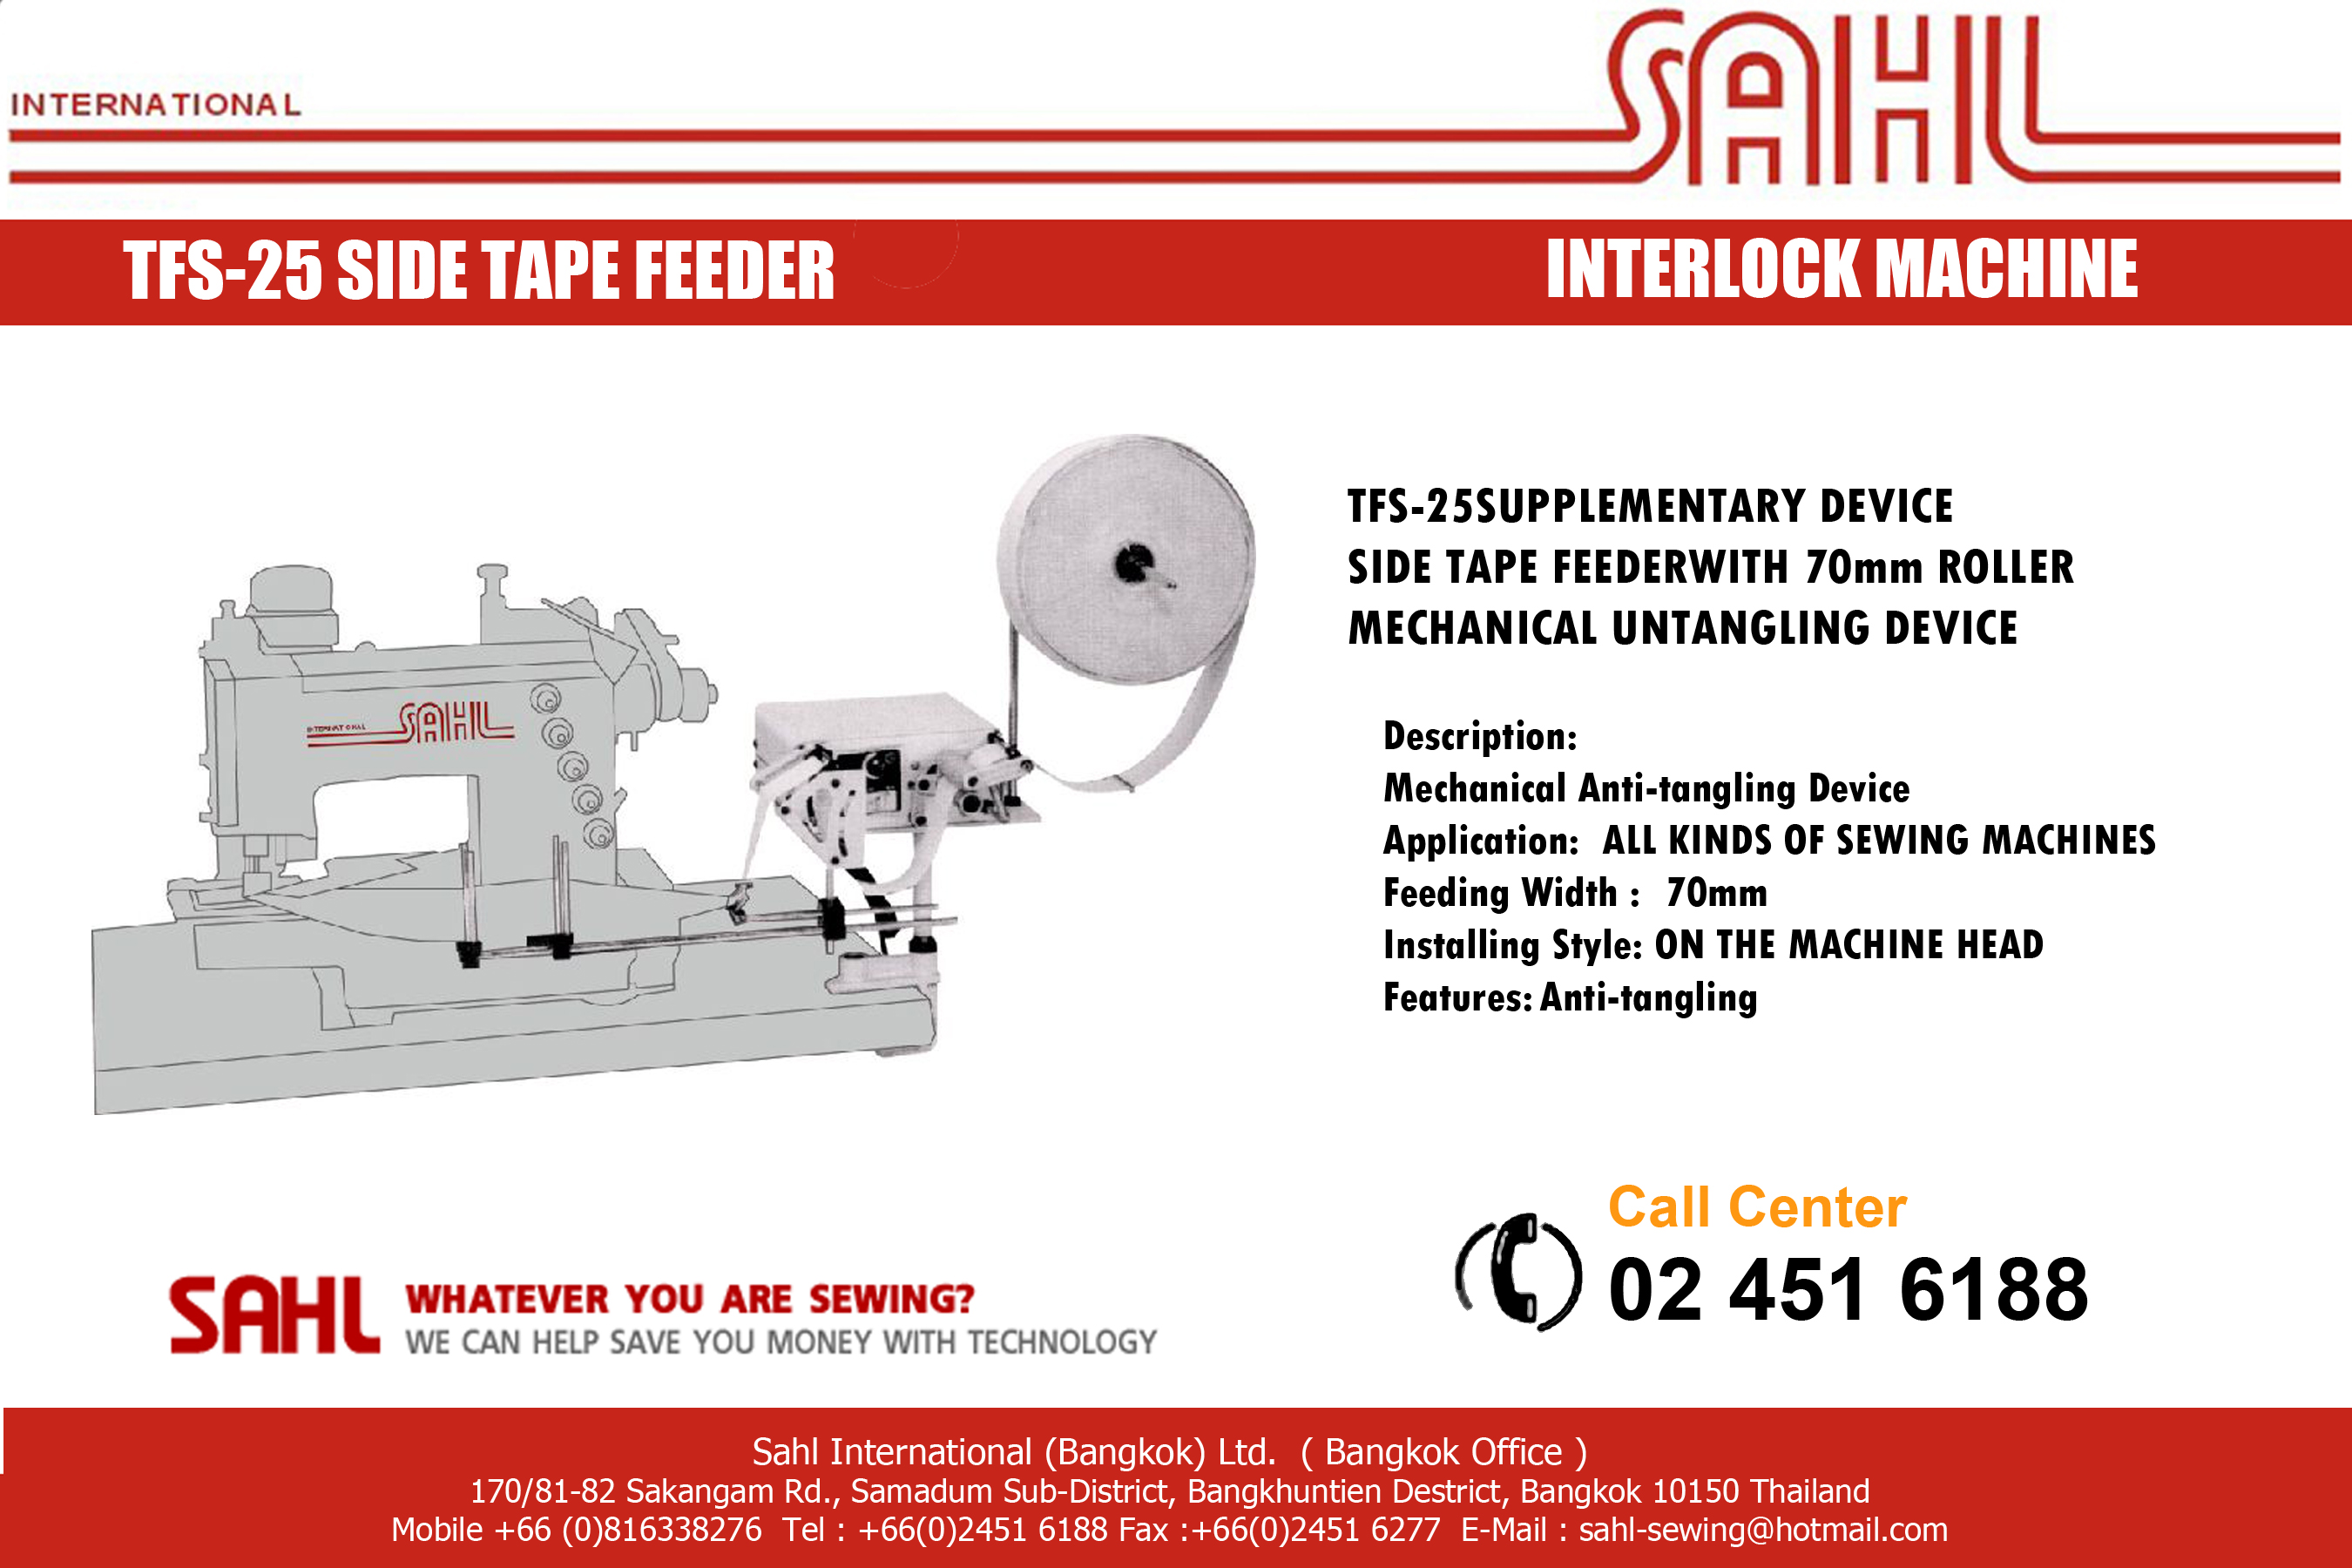 SIDE TAPE FEEDERWITH 70mm ROLLER